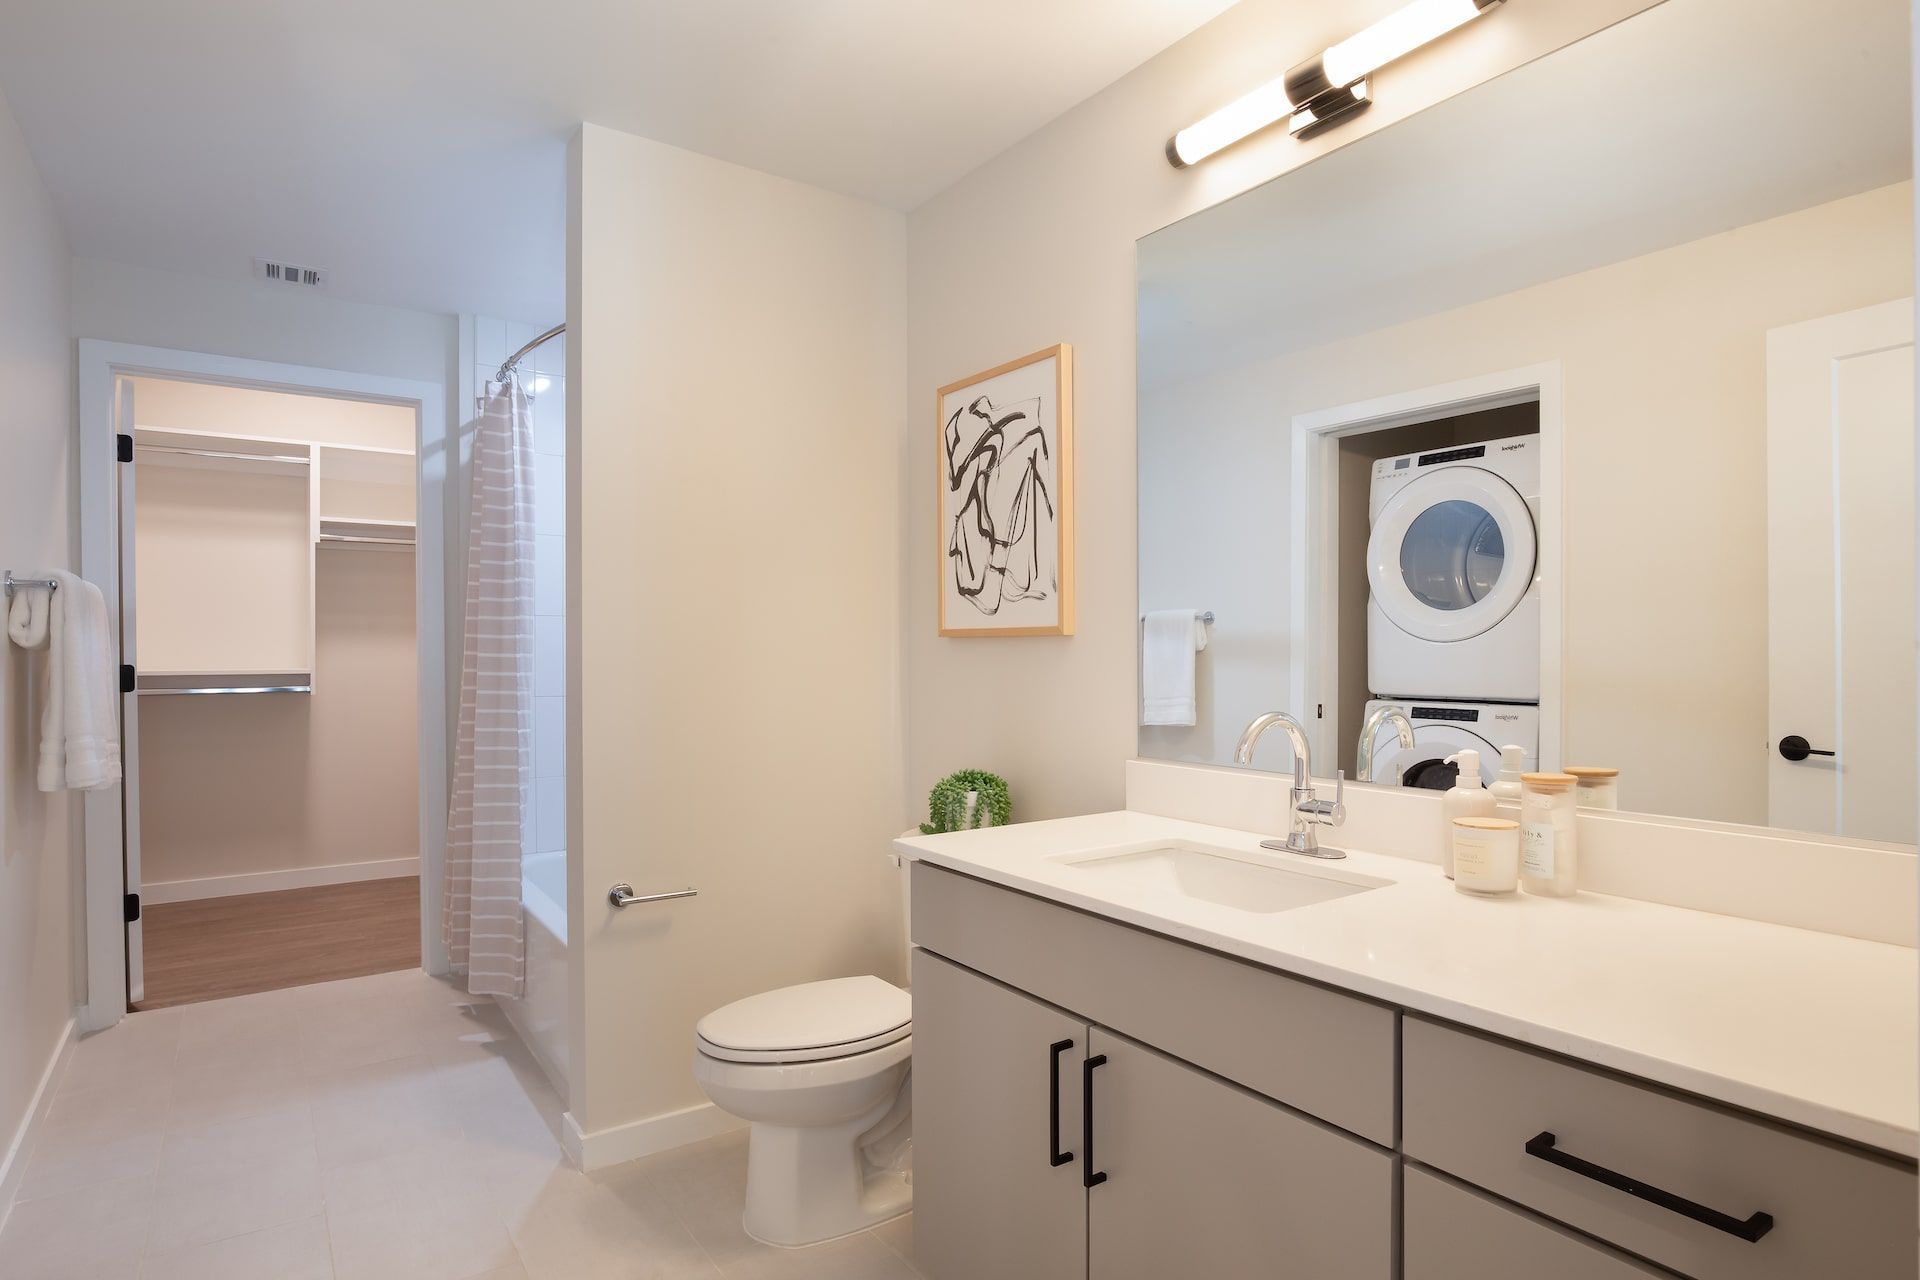 A bathroom with a toilet , sink , mirror and washer and dryer.